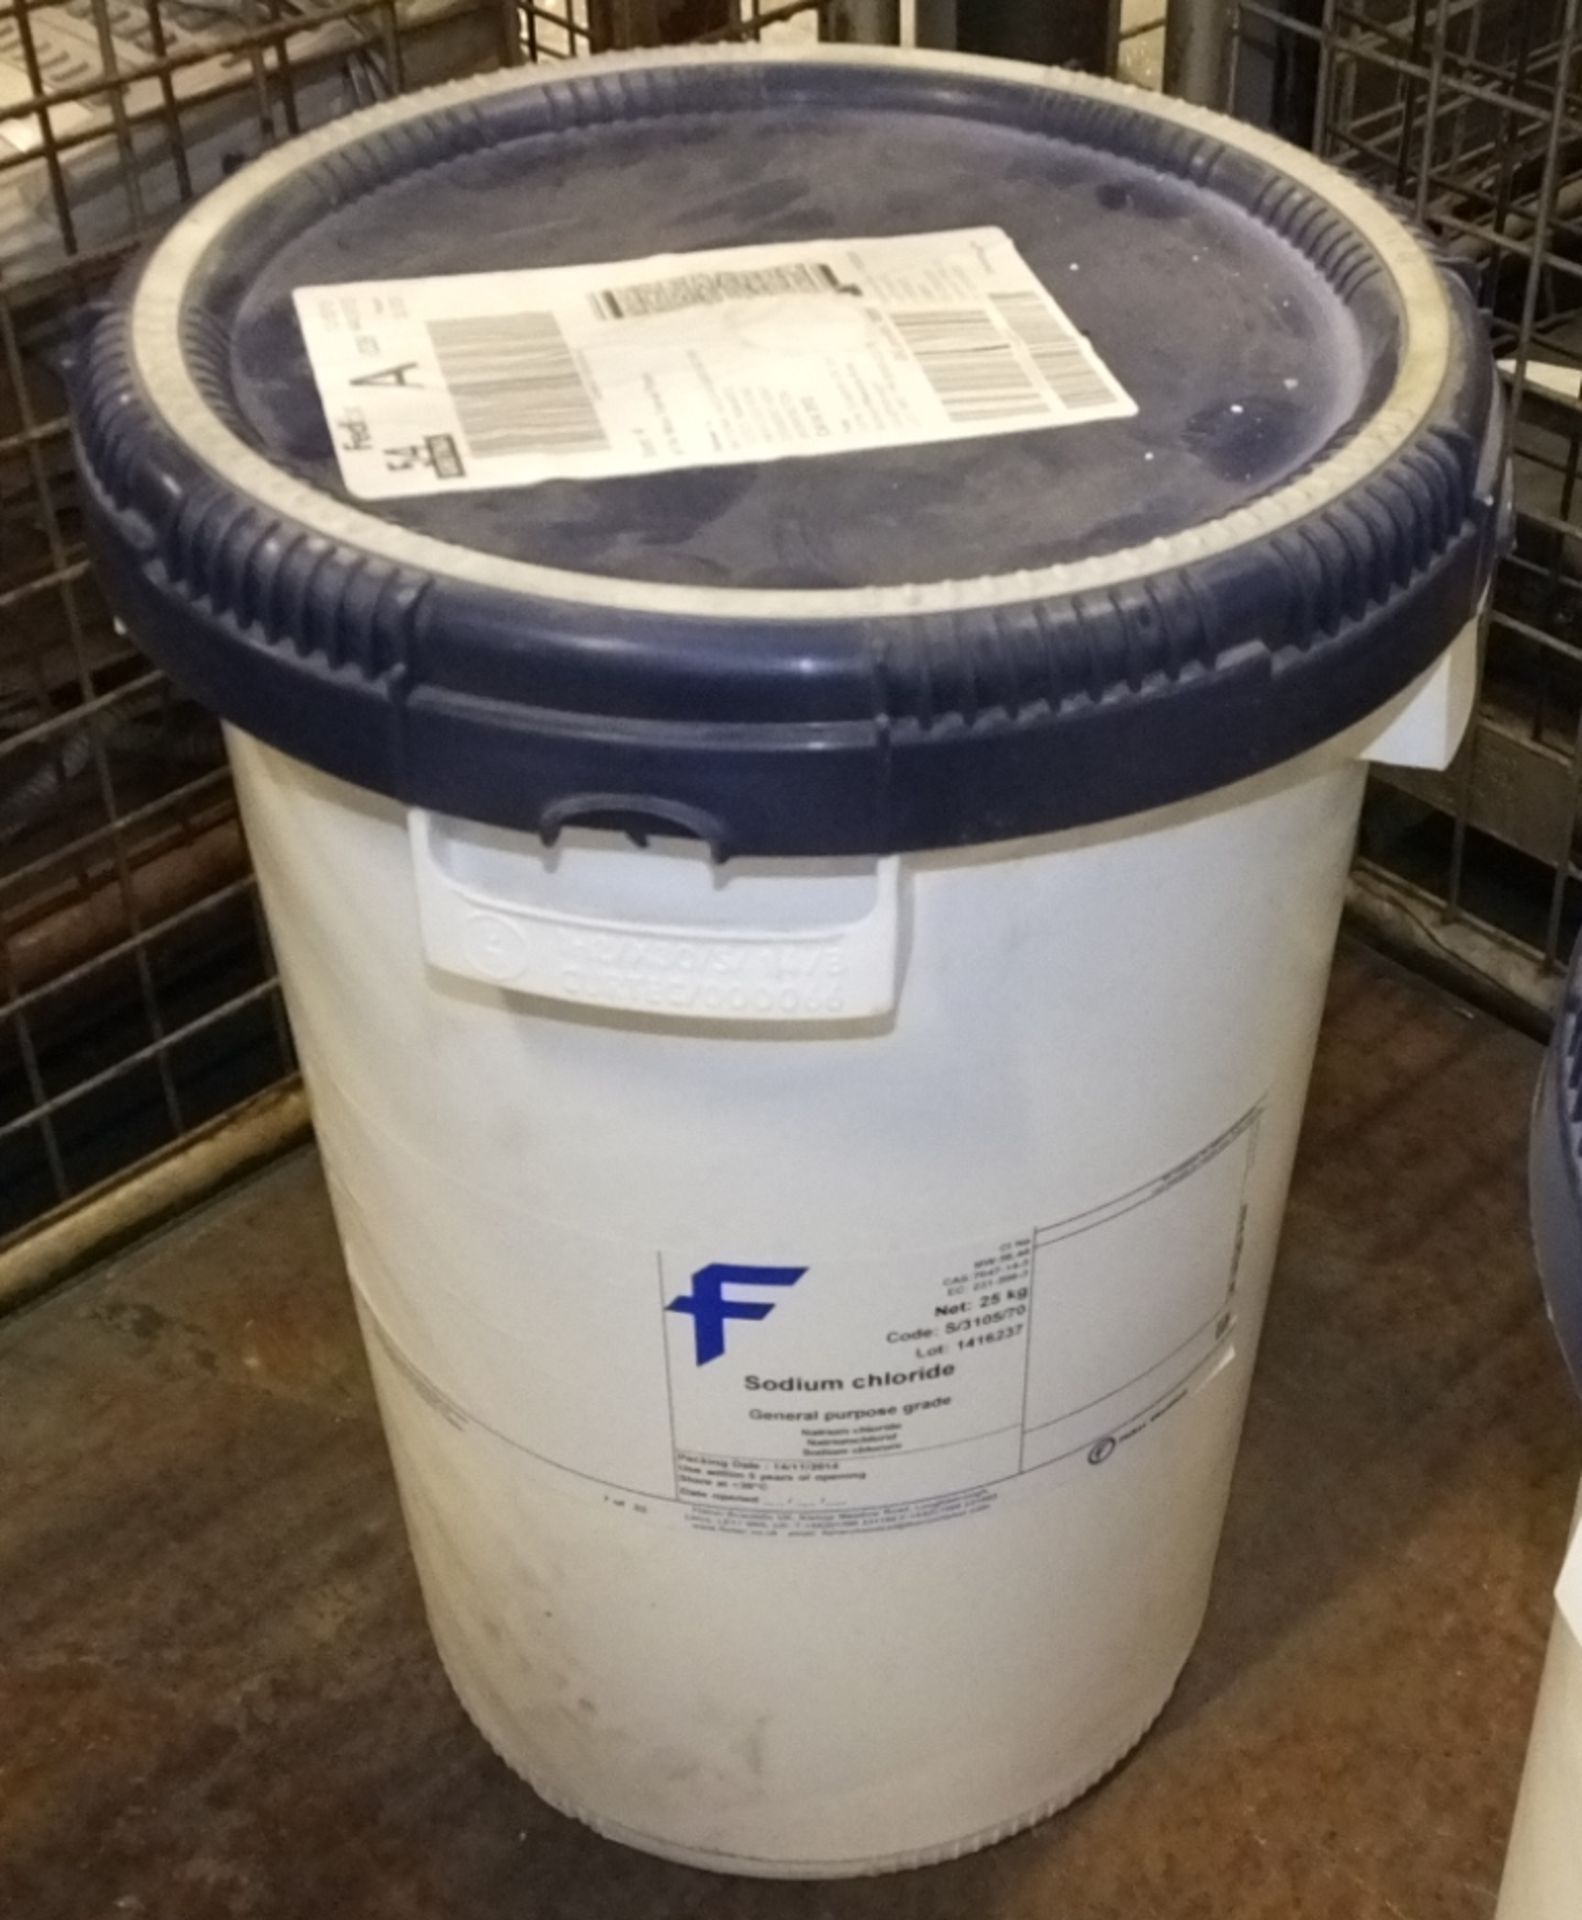 4x 25kg Tubs - Fisher Chemical Sodium Chloride - Image 2 of 3